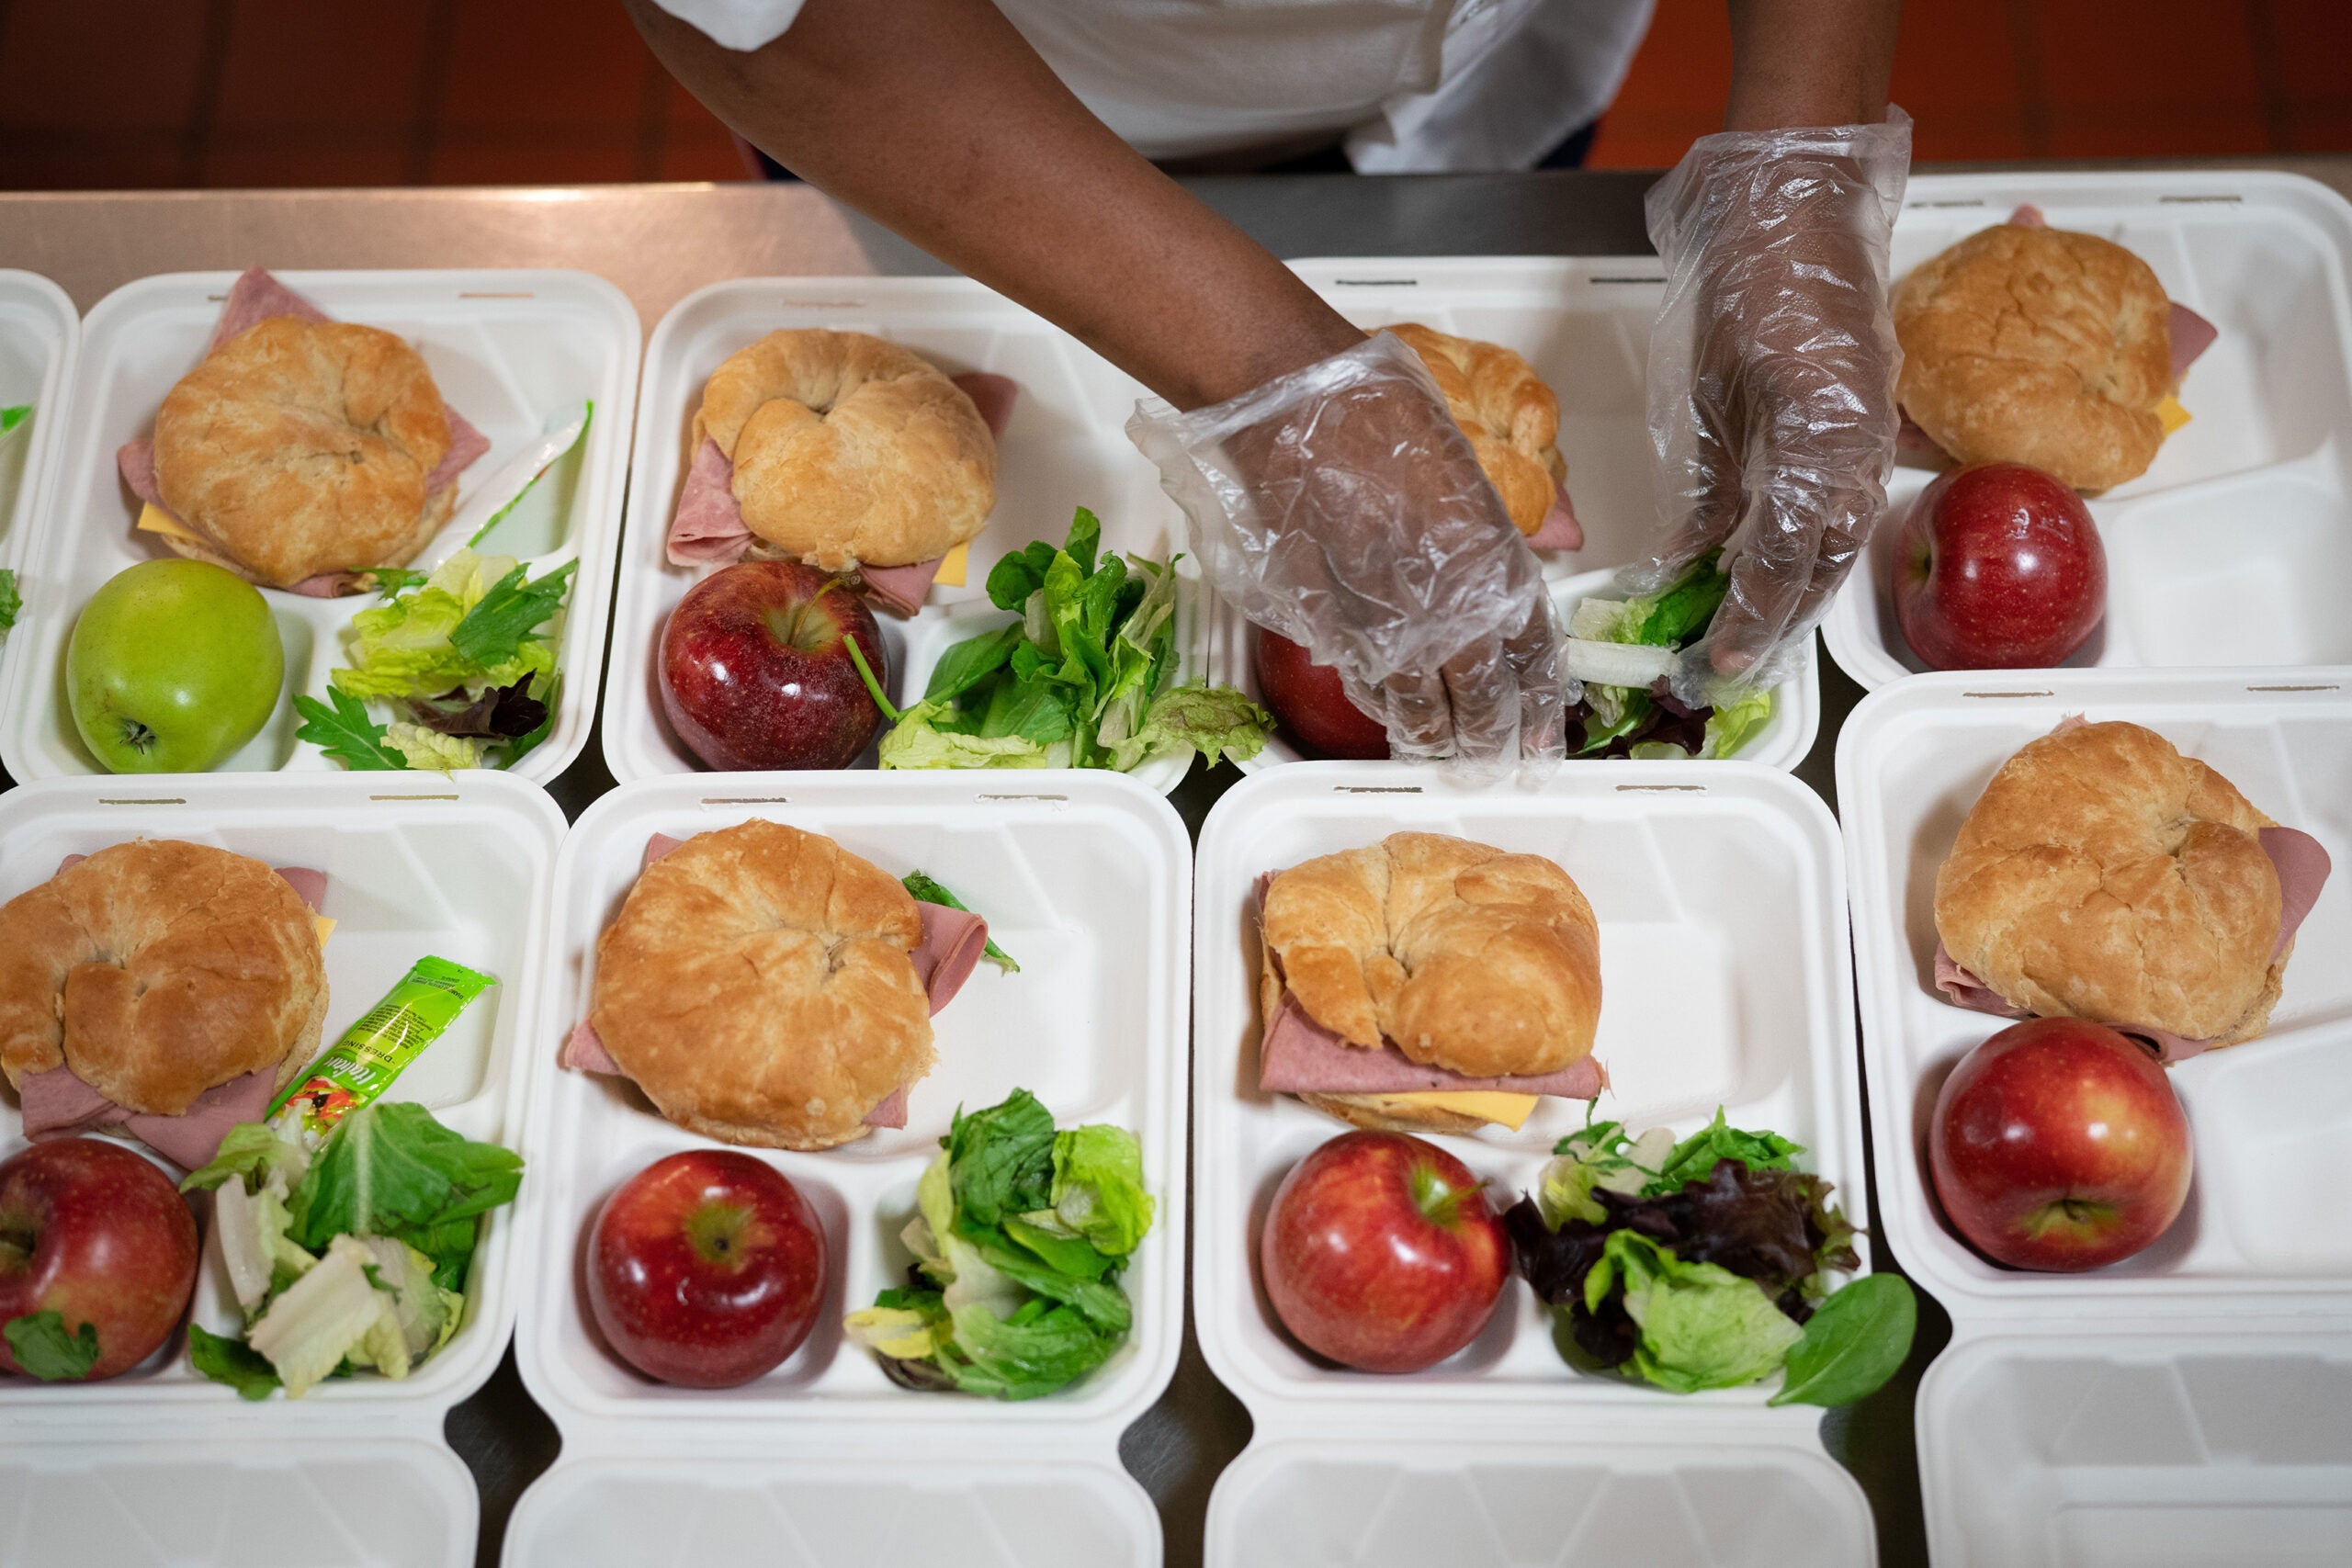 Universal school meals, enacted at the beginning of the pandemic, should be  made permanent